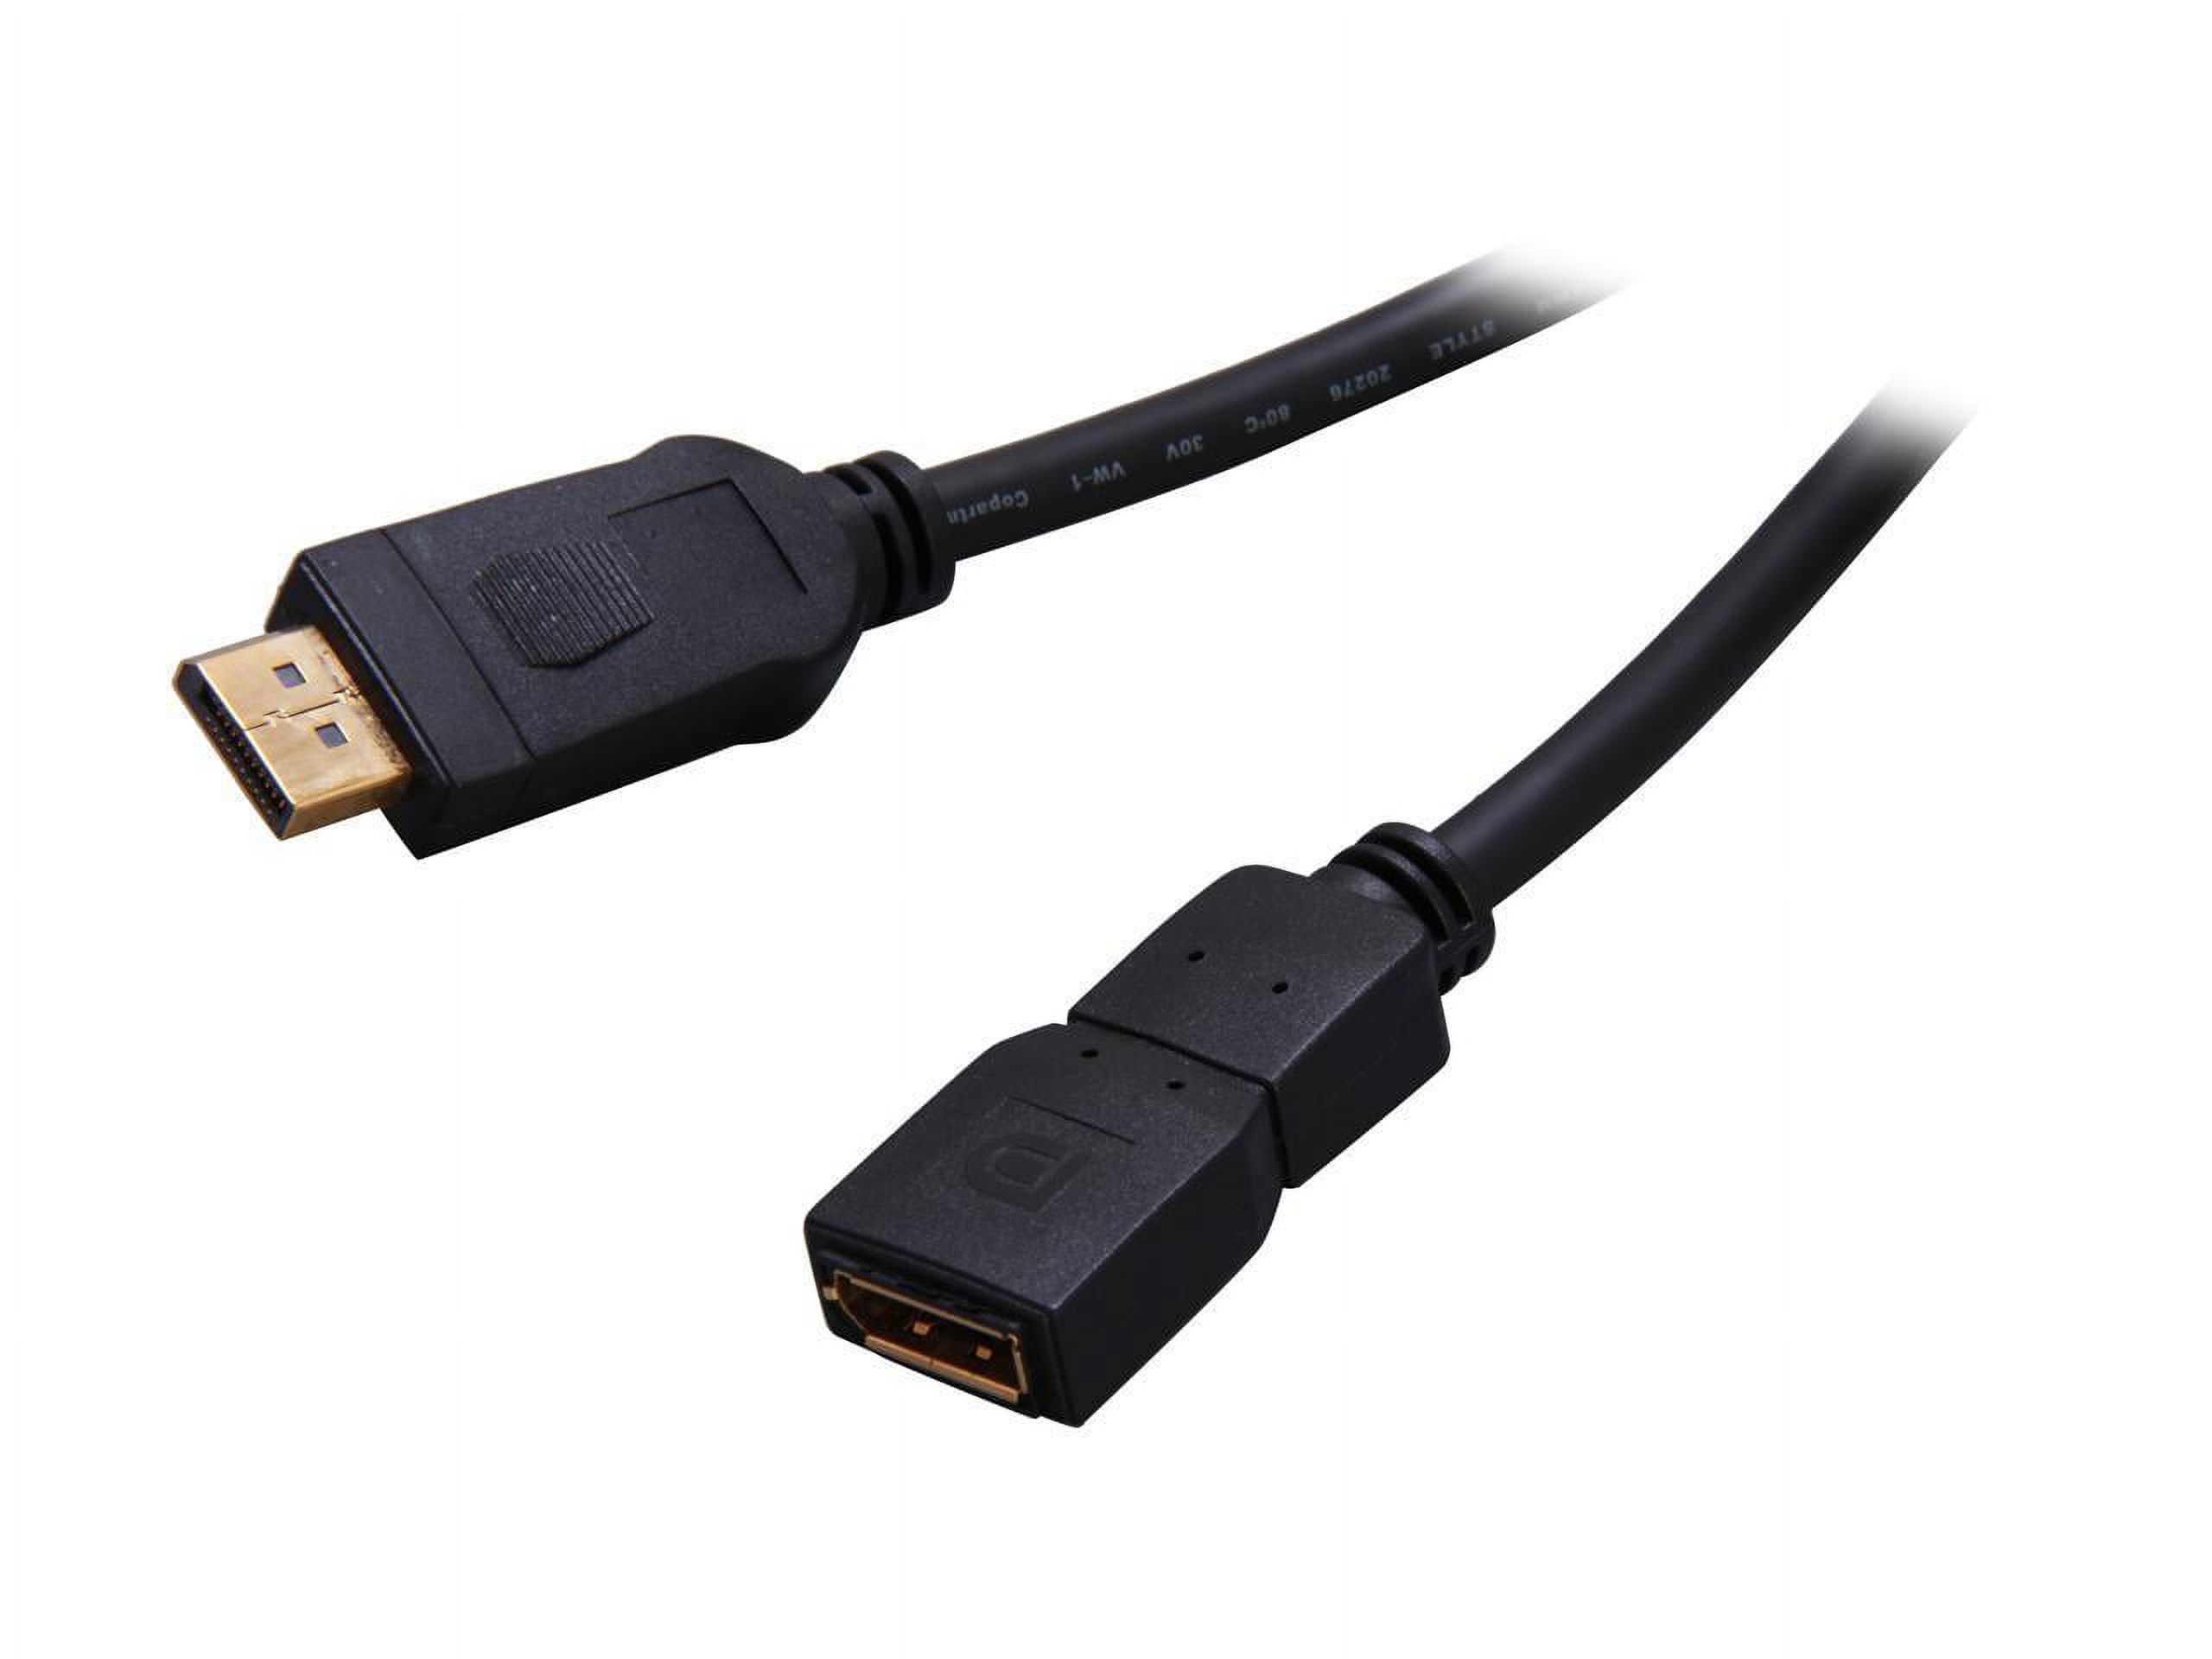 StarTech.com DPEXT6L 6 ft. Black Connector A: 1 - DisplayPort (20 pin; Latching) Male
Connector B: 1 - DisplayPort (20 pin) Female DisplayPort Video Extension Cable Male to Female - image 1 of 3